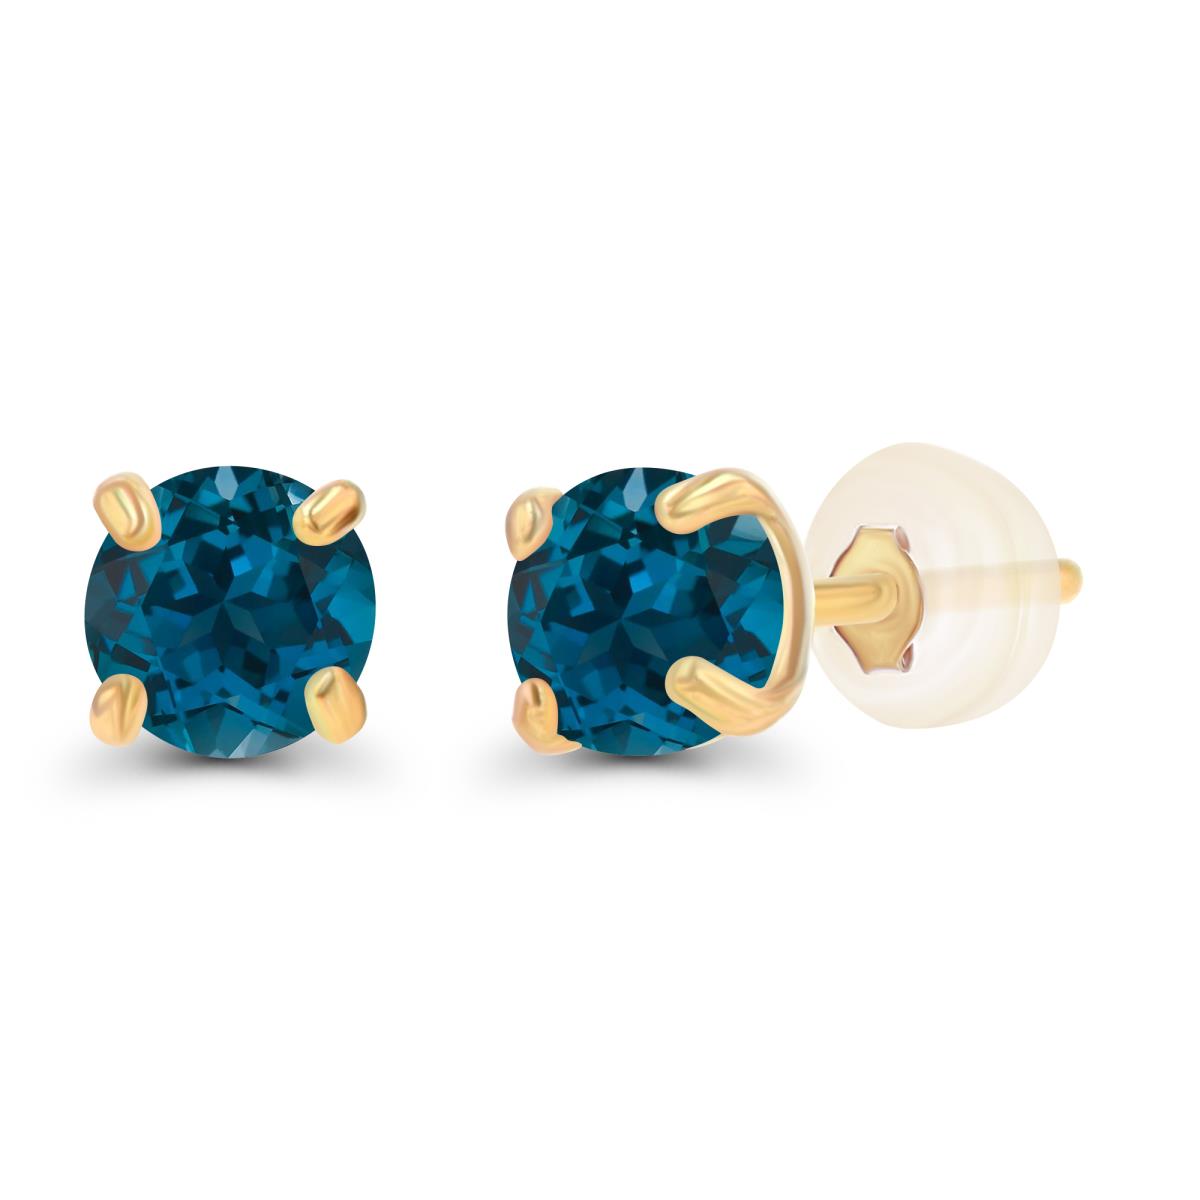 10K Yellow Gold 3mm Round London Blue Topaz Stud Earring with Silicone Back